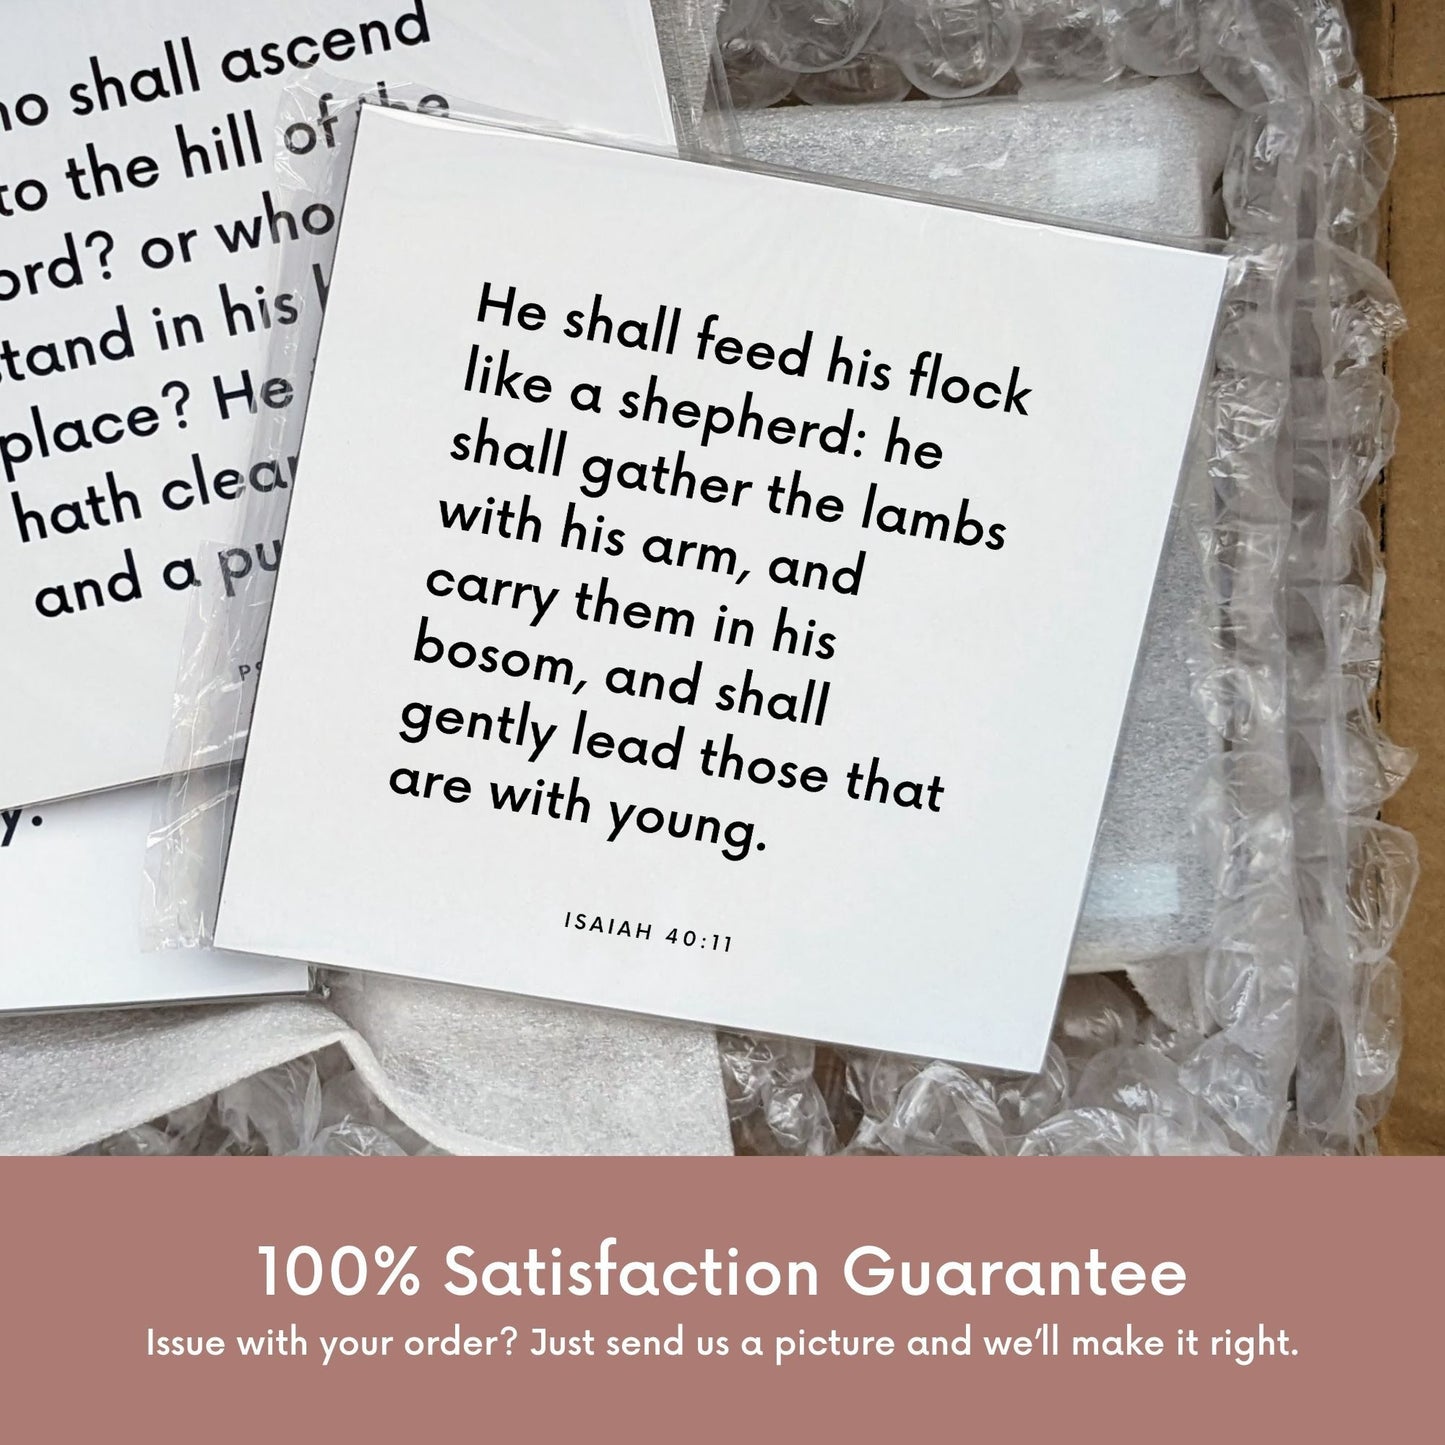 Shipping materials for scripture tile of Isaiah 40:11 - "He shall feed his flock like a shepherd"